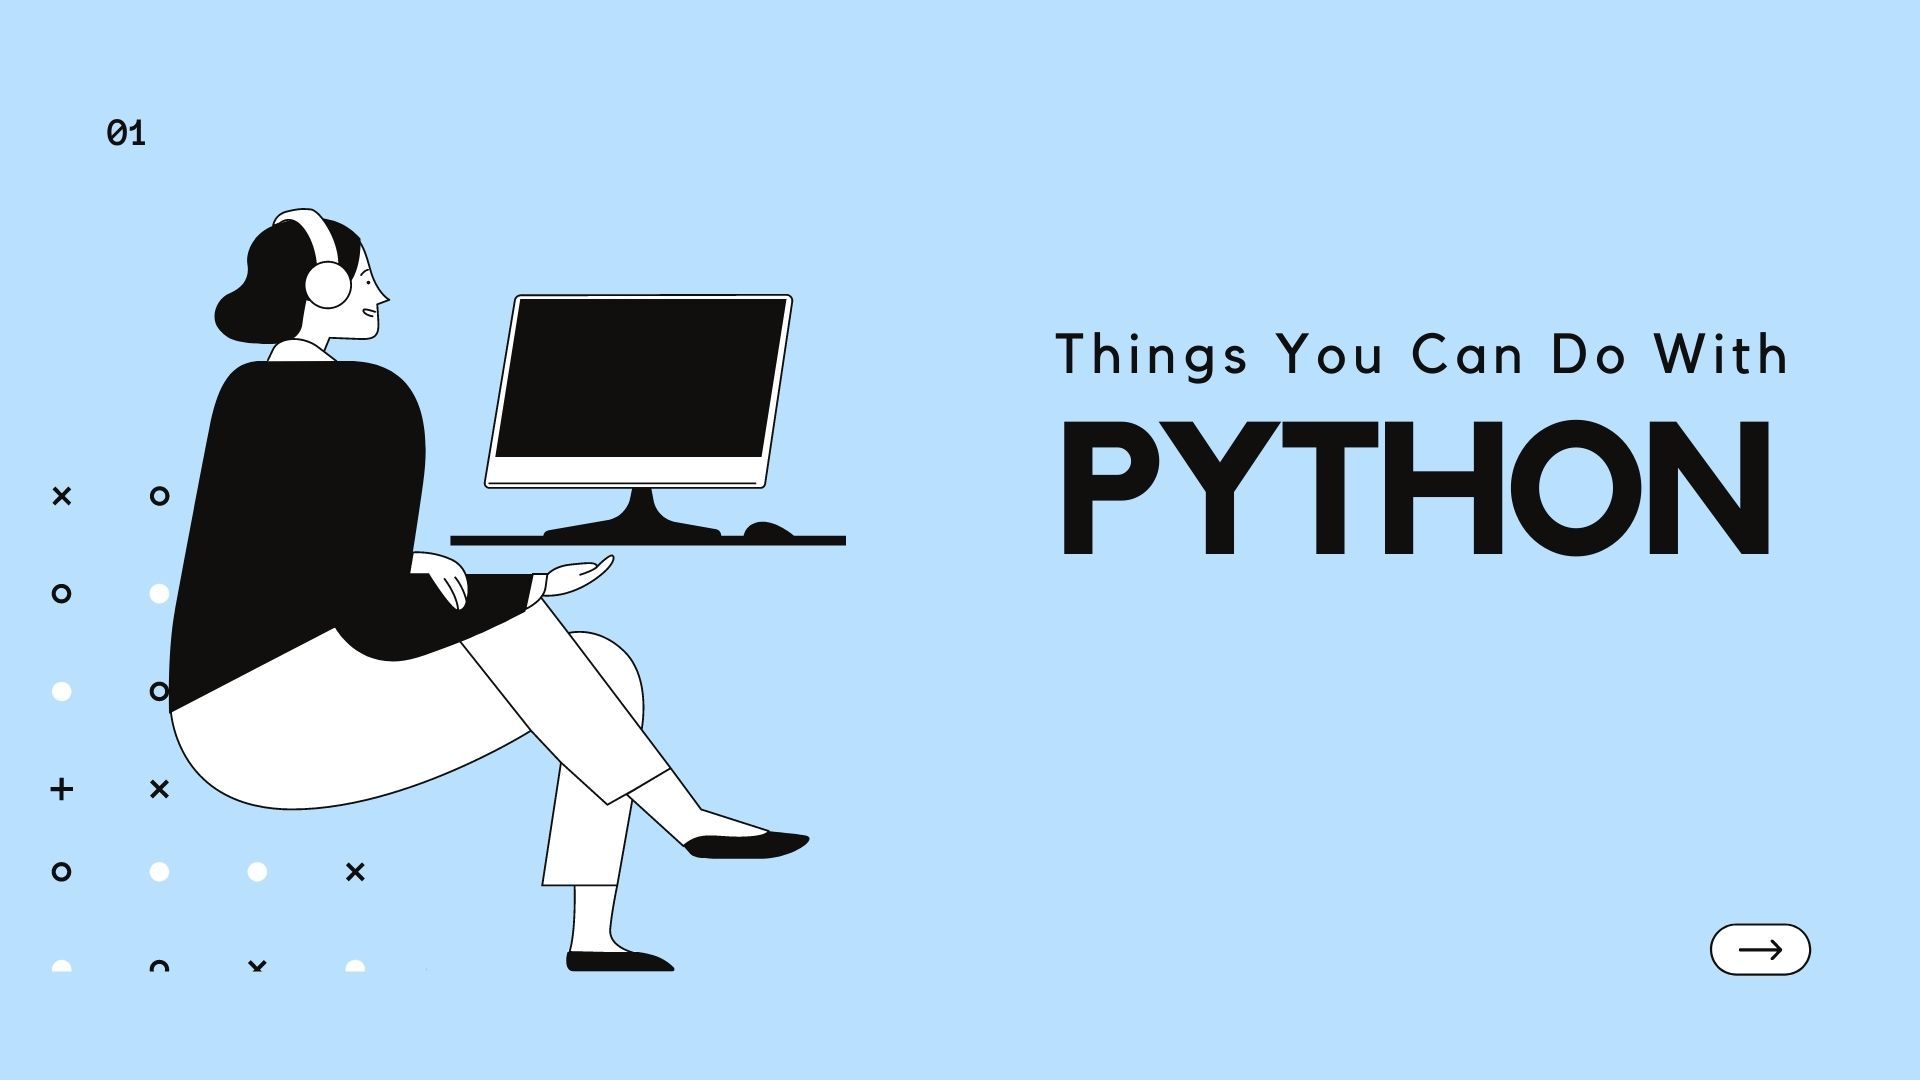 Things You Can Do With Python